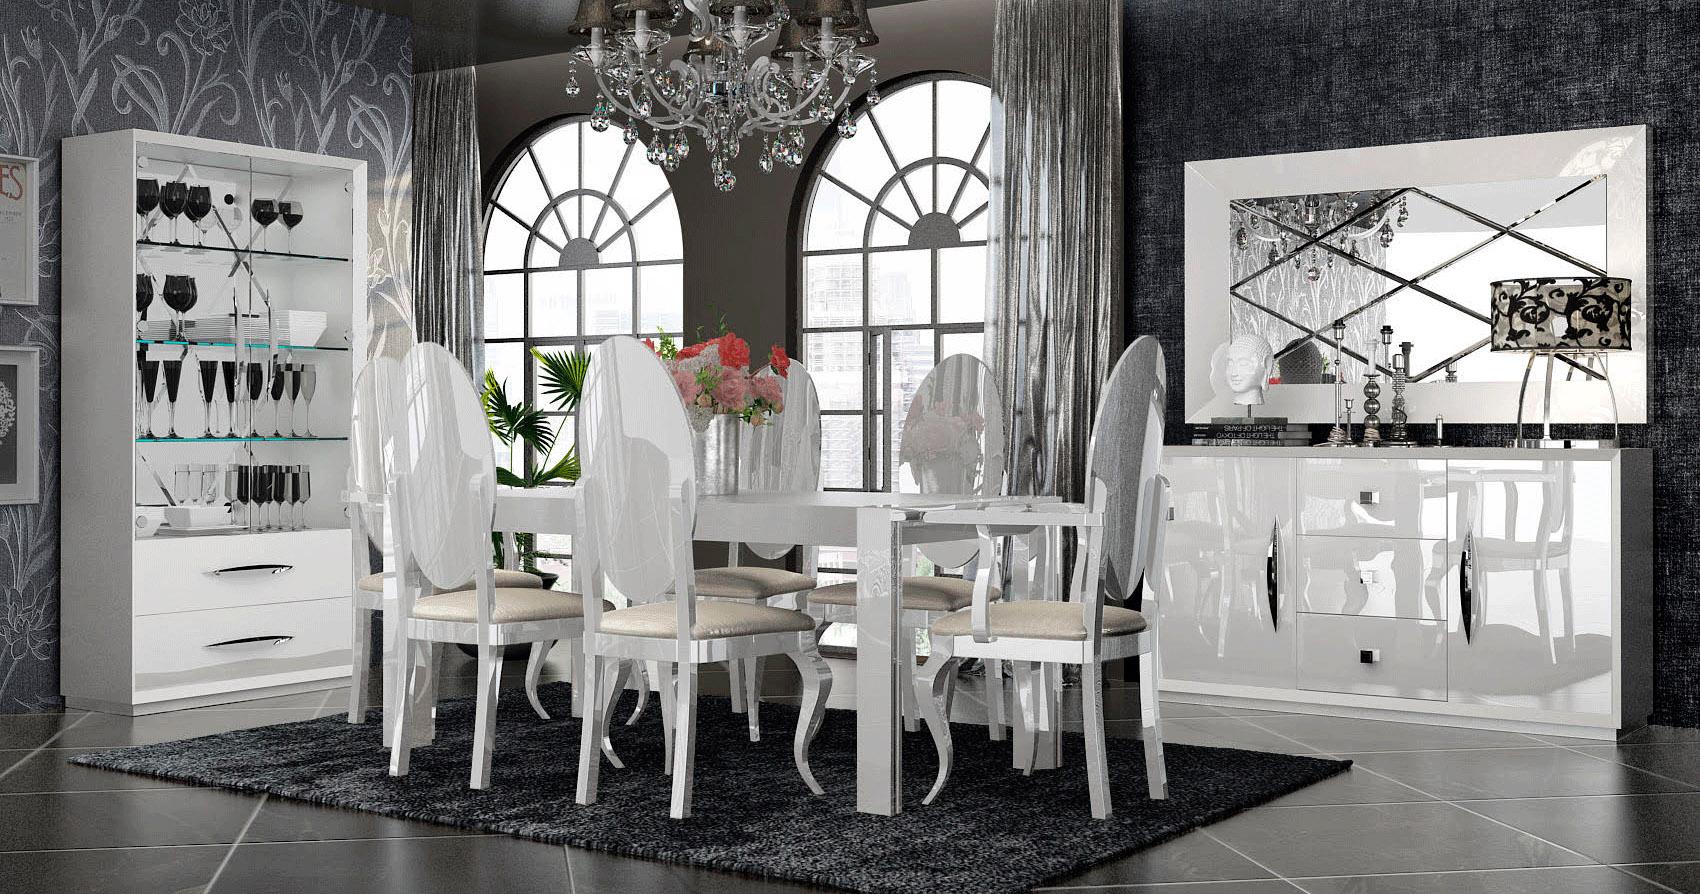 Wooden Contemporary Dining Room Set, Contemporary Dining Room Tables With Leaves